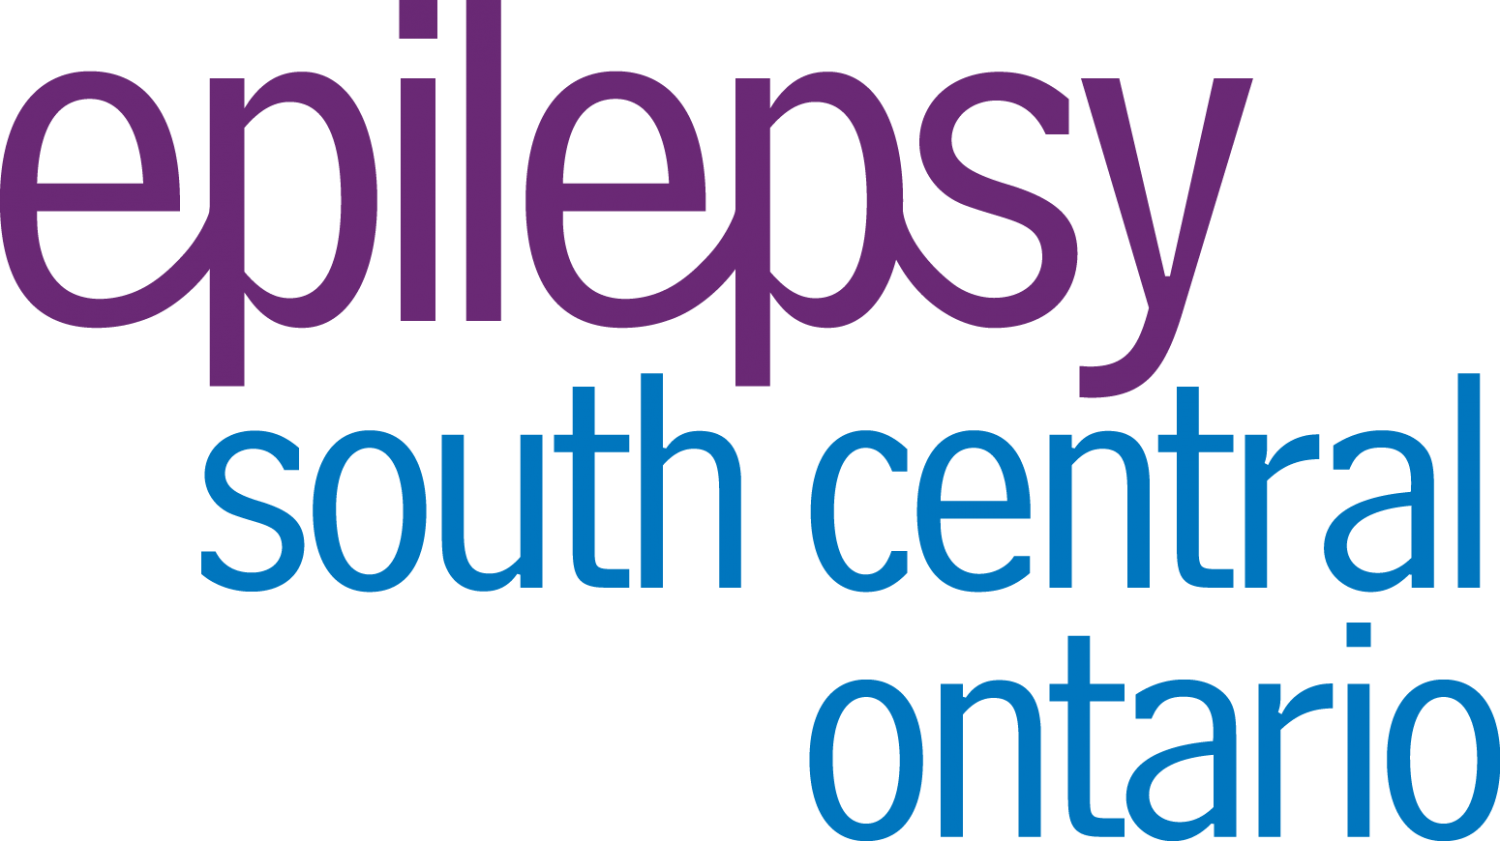 Epilepsy South Central Ontario Working Together To - Epilepsy South Central Ontario (1500x841)